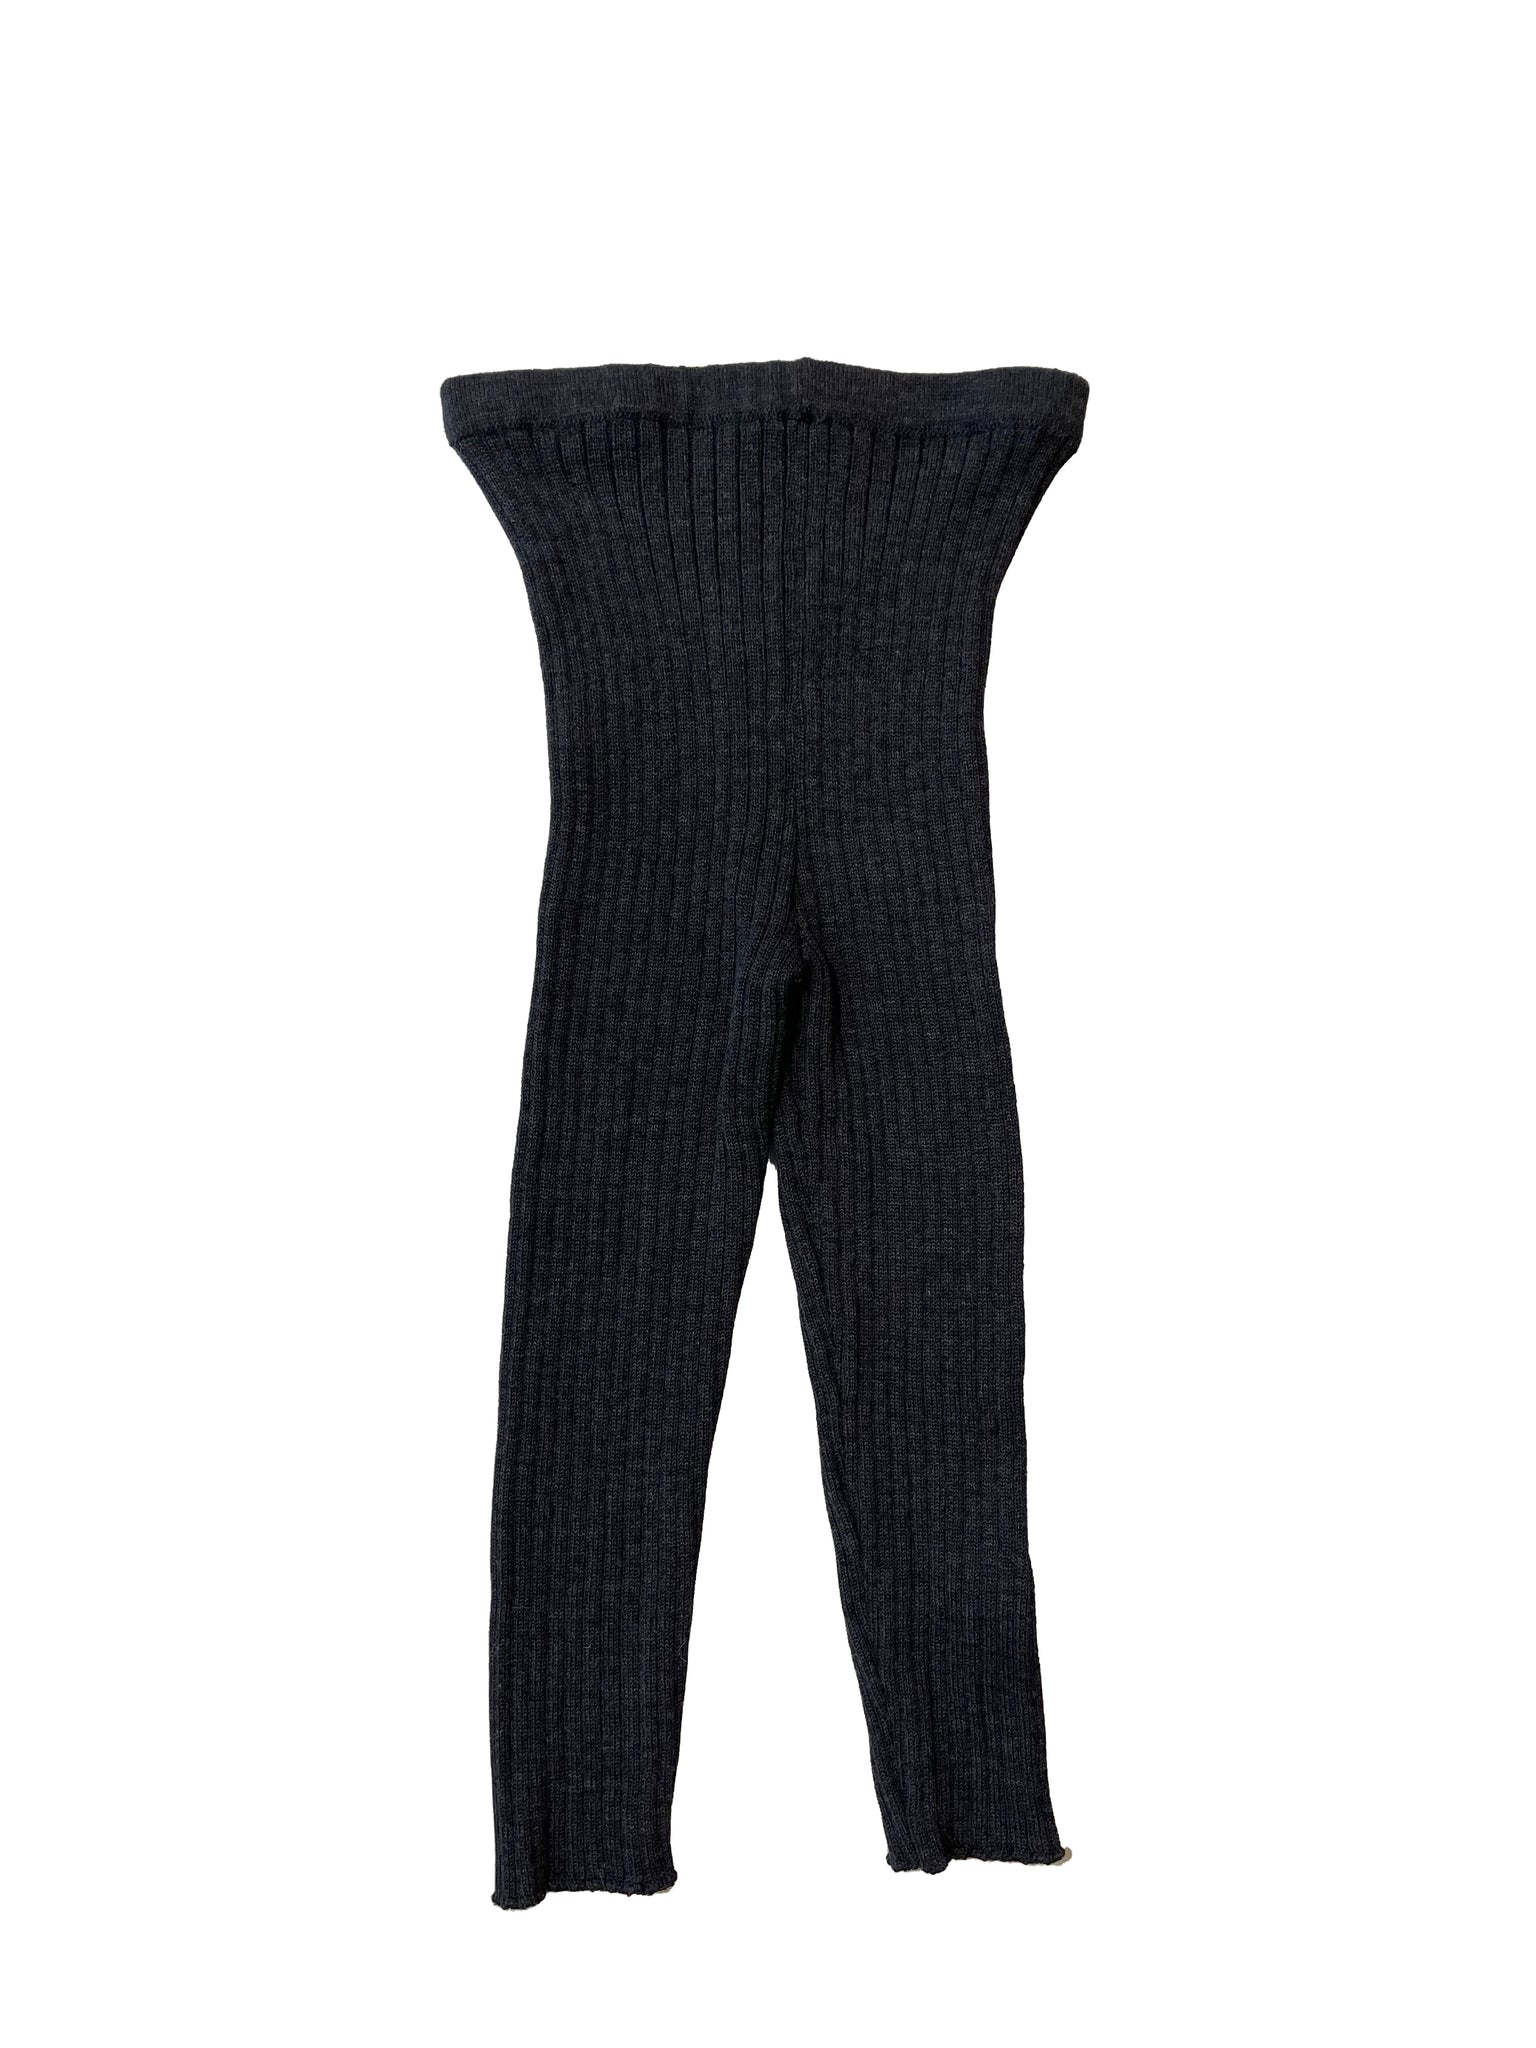 THE KNITTED CAPRIS